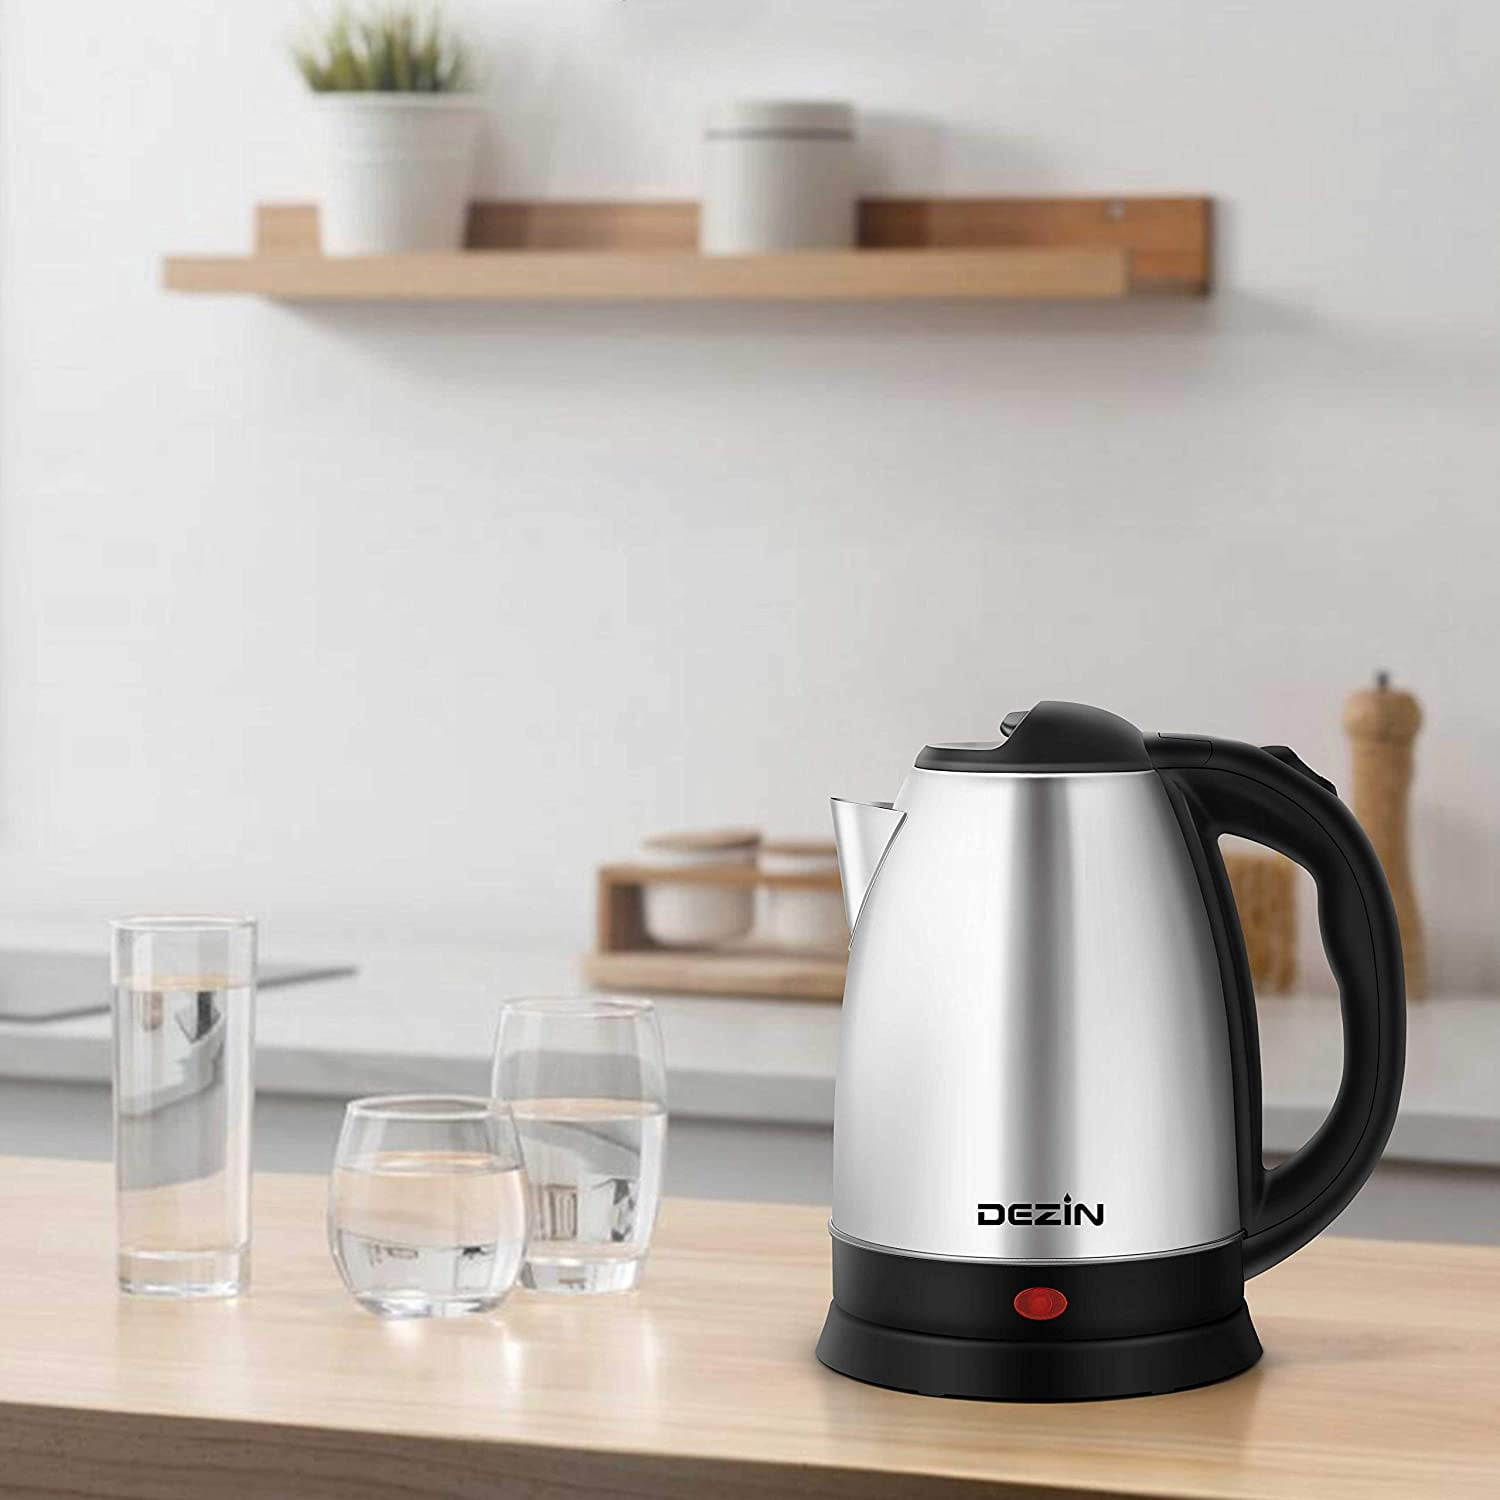 Dezin Electric Kettle Upgraded, 2L Stainless Steel Cordless Tea Kettle,  Fast Boil Water Warmer with Auto Shut Off and Boil Dry Protection Tech for  Coffee, Tea, Beverages 